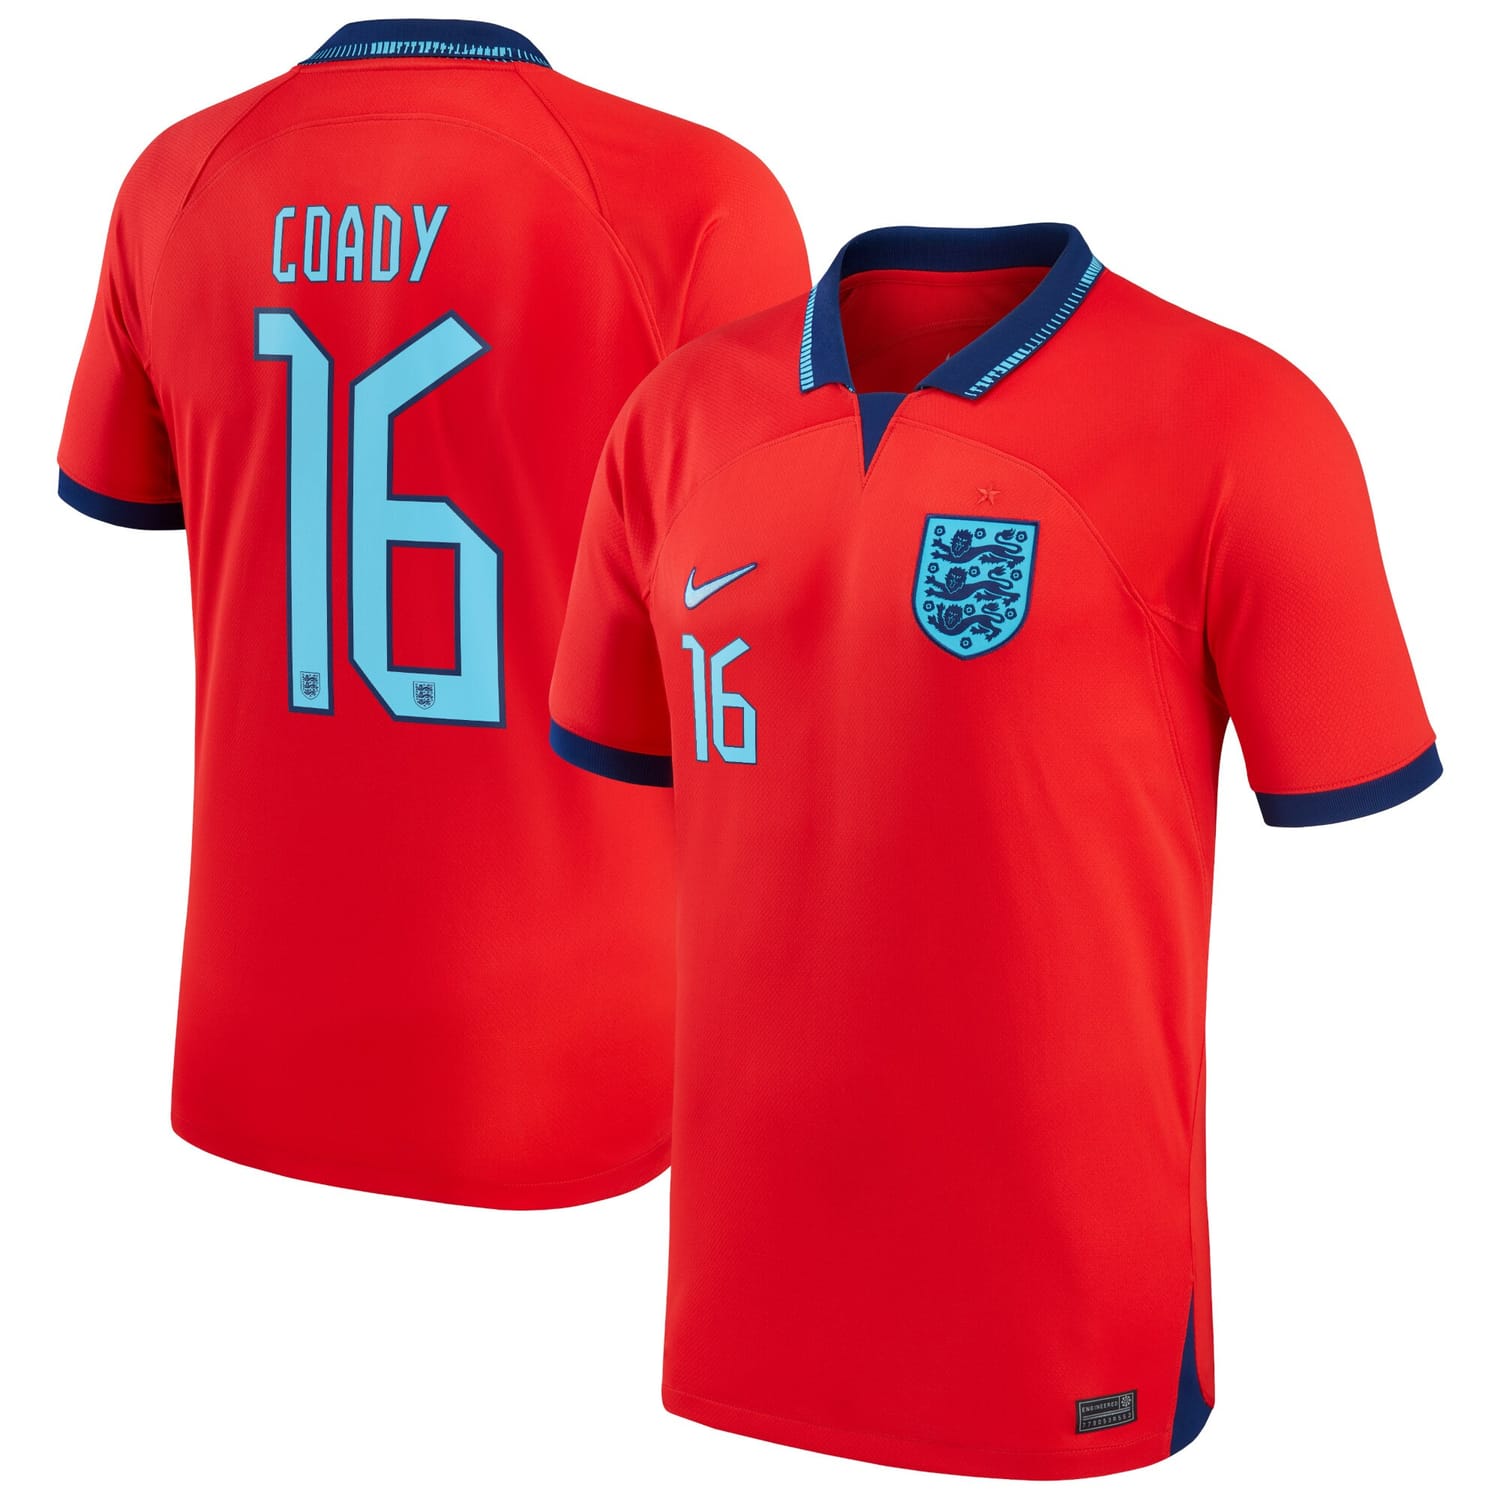 England National Team Away Jersey Shirt 2022 player Conor Coady 16 printing for Men